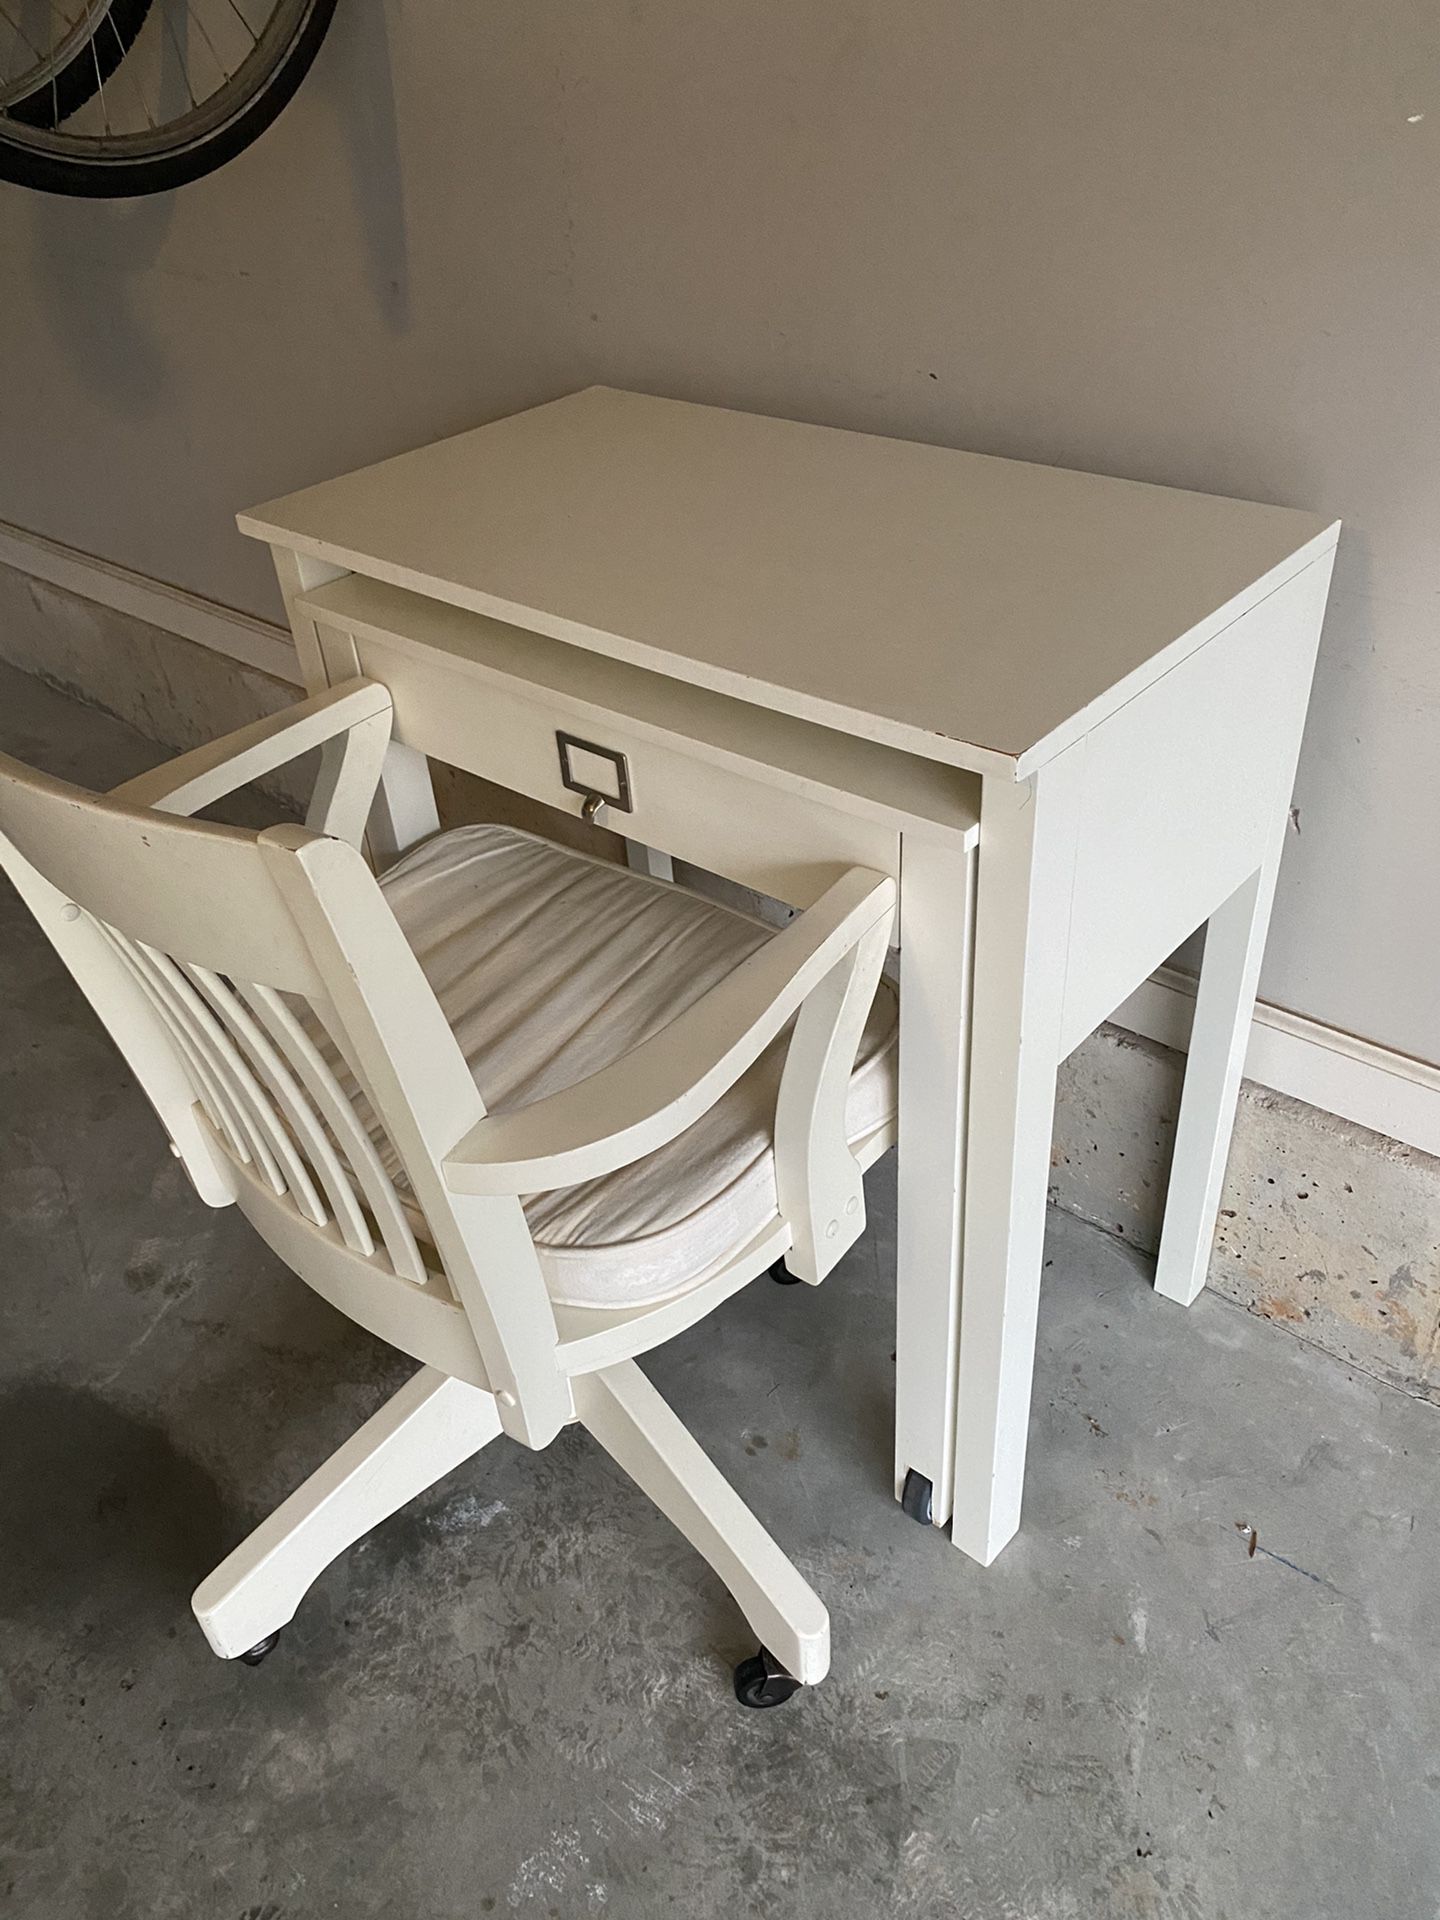 Working from home? Like new white Pottery Barn nesting desk and rolling chair